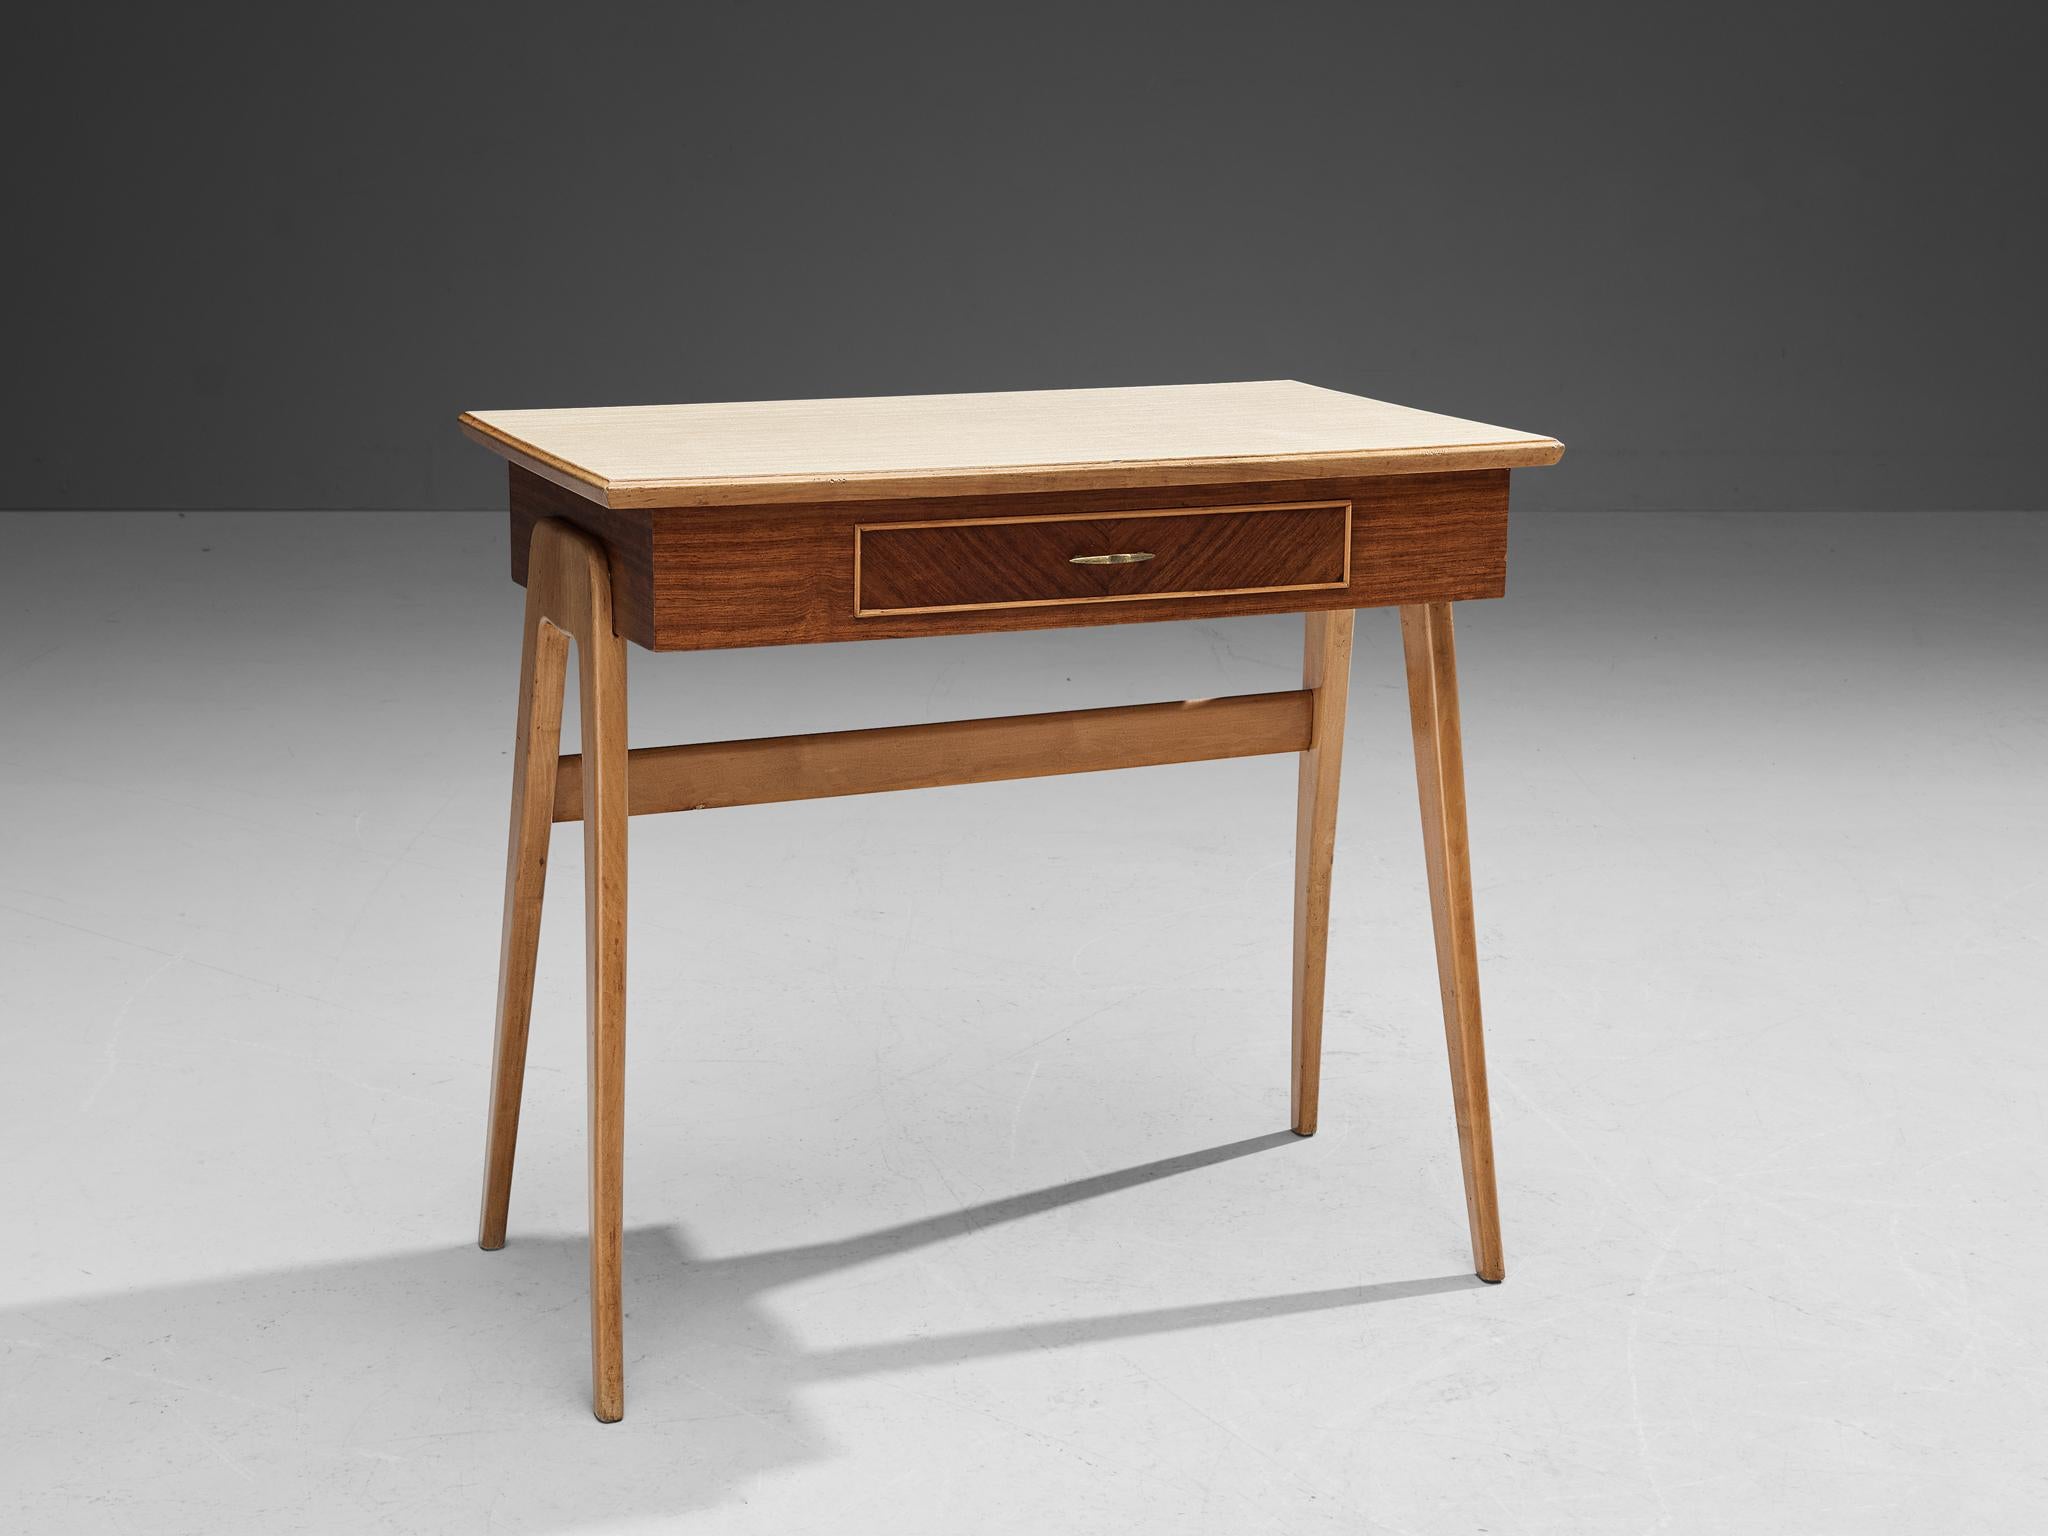 Writing desk, mahogany veneer, walnut, brass, formica, Italy, 1950s

Very elegant desk made in Italy in the 1950s. This desk is executed in a walnut frame. The upper part of the piece is veneered, and the top is inlayed with a very practical